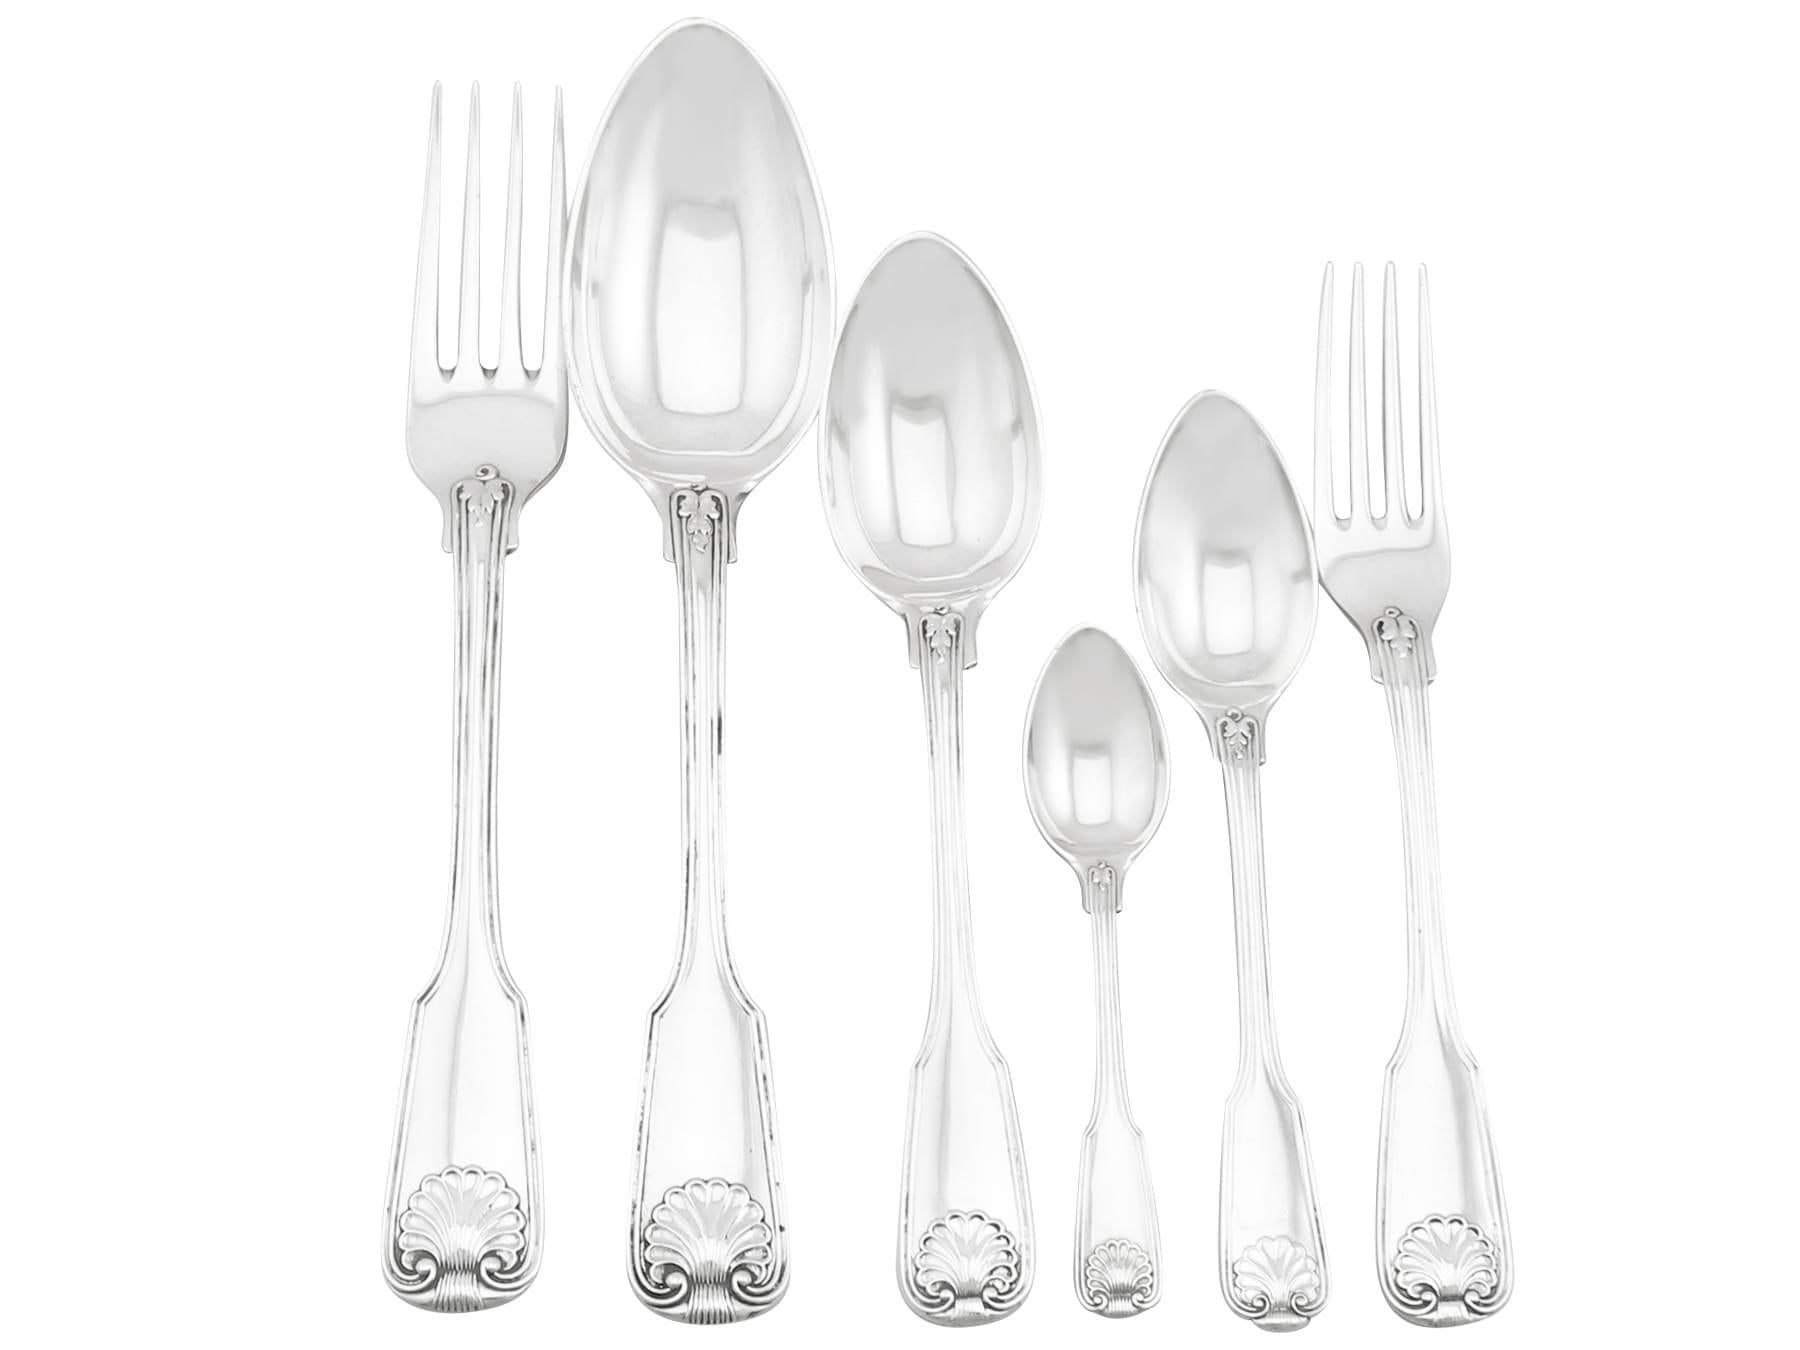 An exceptional, fine and impressive antique German 800 standard silver straight fiddle, thread and shell pattern flatware service for ten persons; an addition to our flatware collection.

The pieces of this exceptional, antique straight German